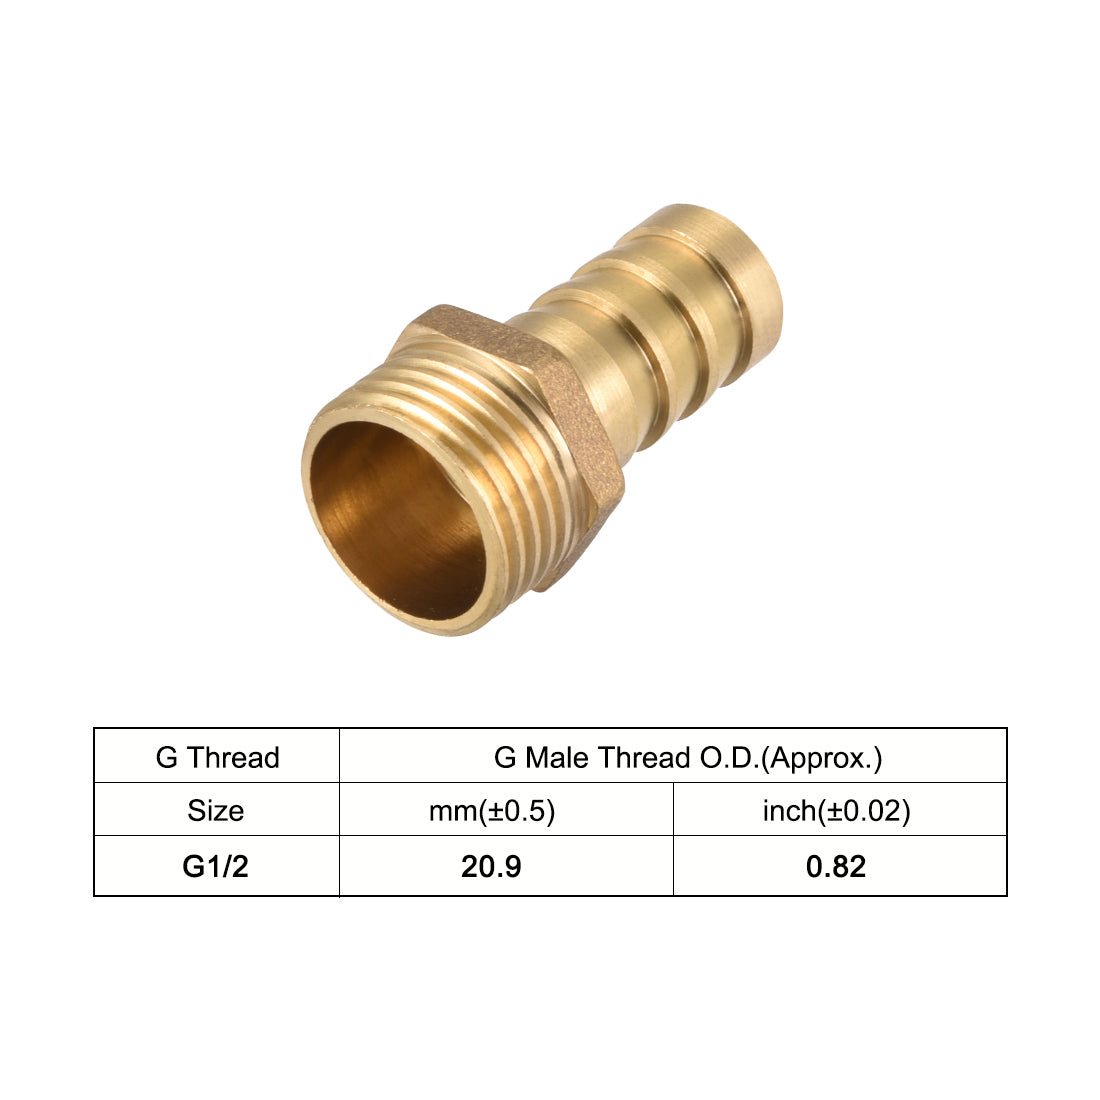 uxcell Uxcell Brass Barb Hose Fitting Connector Adapter 14mm Barbed x G1/2 Male 2Pcs